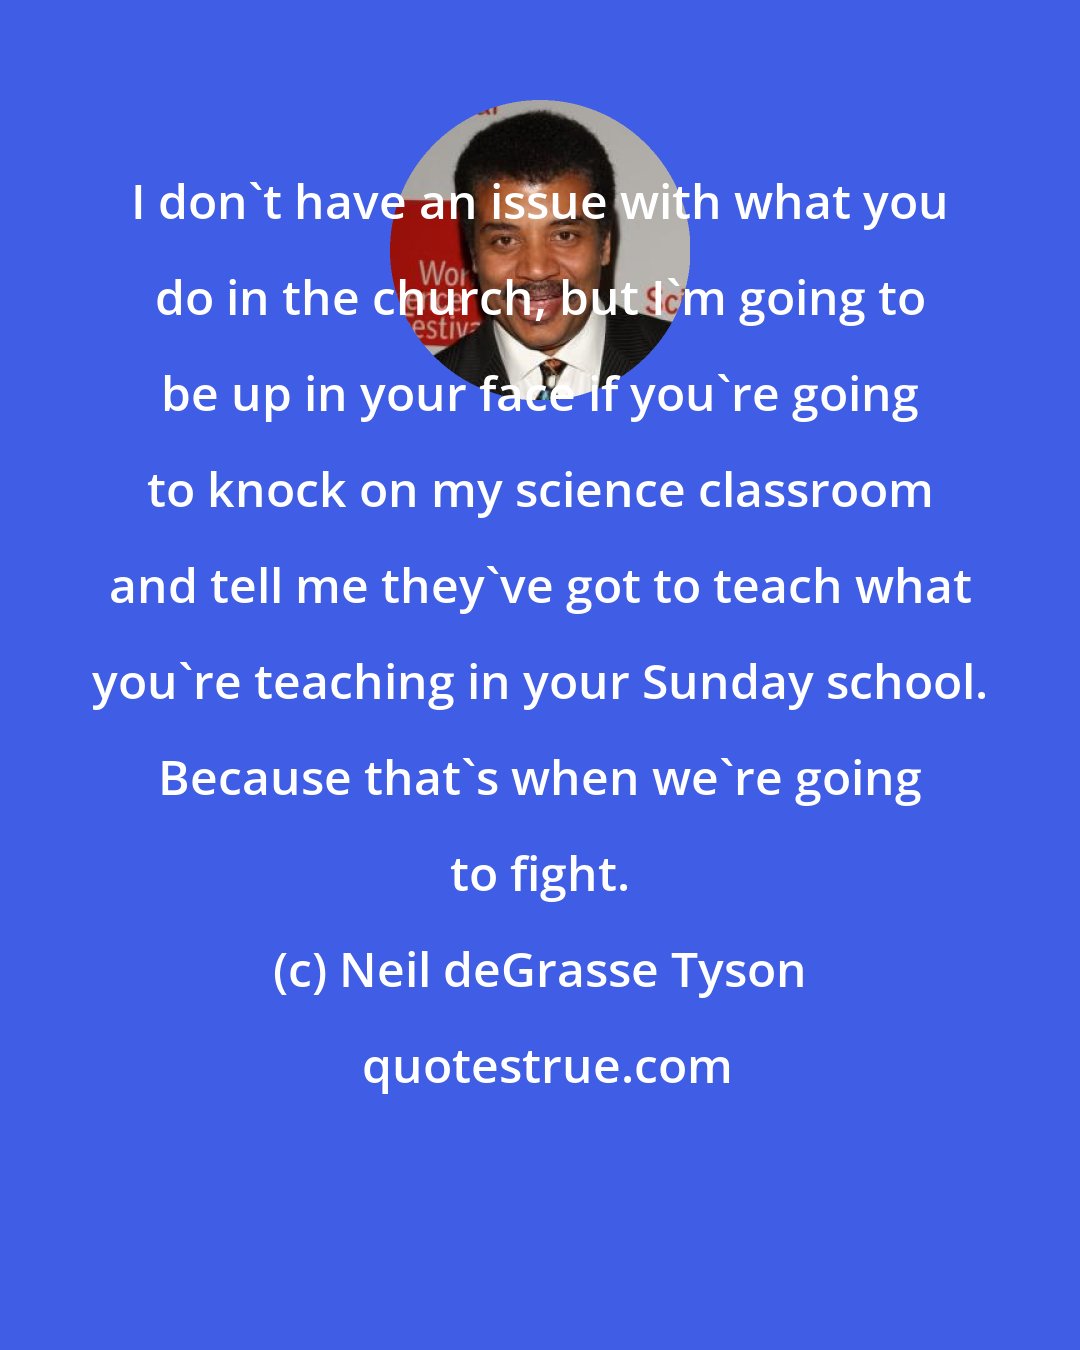 Neil deGrasse Tyson: I don't have an issue with what you do in the church, but I'm going to be up in your face if you're going to knock on my science classroom and tell me they've got to teach what you're teaching in your Sunday school. Because that's when we're going to fight.